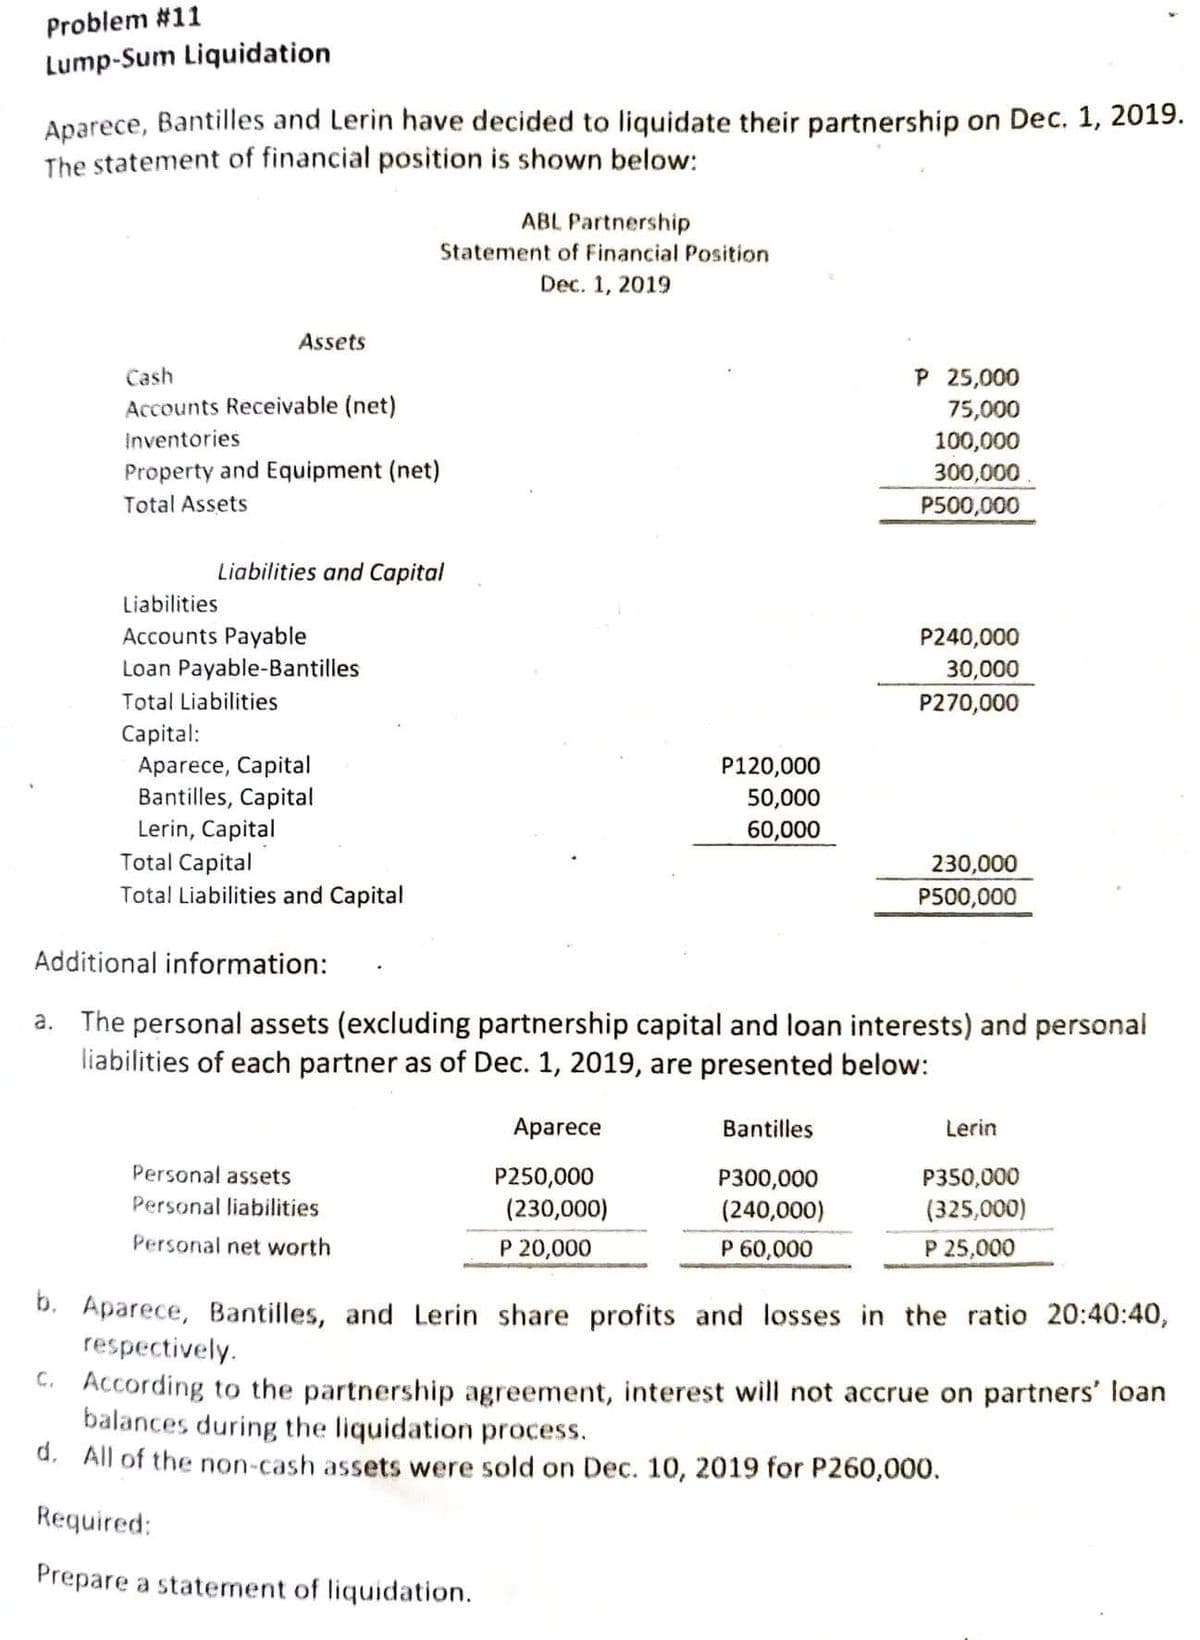 Problem #11
Lump-Sum Liquidation
Aparece, Bantilles and Lerin have decided to liquidate their partnership on Dec. 1, 2019.
The statement of financial position is shown below:
ABL Partnership
Statement of Financial Position
Dec. 1, 2019
Assets
P 25,000
75,000
100,000
300,000
P500,000
Cash
Accounts Receivable (net)
Inventories
Property and Equipment (net)
Total Assets
Liabilities and Capital
Liabilities
Accounts Payable
P240,000
Loan Payable-Bantilles
30,000
Total Liabilities
P270,000
Capital:
Aparece, Capital
Bantilles, Capital
Lerin, Capital
Total Capital
Total Liabilities and Capital
P120,000
50,000
60,000
230,000
P500,000
Additional information:
a. The personal assets (excluding partnership capital and loan interests) and personal
liabilities of each partner as of Dec. 1, 2019, are presented below:
Aparece
Bantilles
Lerin
Personal assets
P250,000
P300,000
P350,000
Personal liabilities
(230,000)
(240,000)
(325,000)
Personal net worth
P 20,000
P 60,000
P 25,000
D. Aparece, Bantilles, and Lerin share profits and losses in the ratio 20:40:40,
respectively.
C. According to the partnership agreement, interest will not accrue on partners' loan
balances during the liquidation process.
a. All of the non-cash assets were sold on Dec. 10, 2019 for P260,000.
Required:
Prepare a statement of liquidation.
